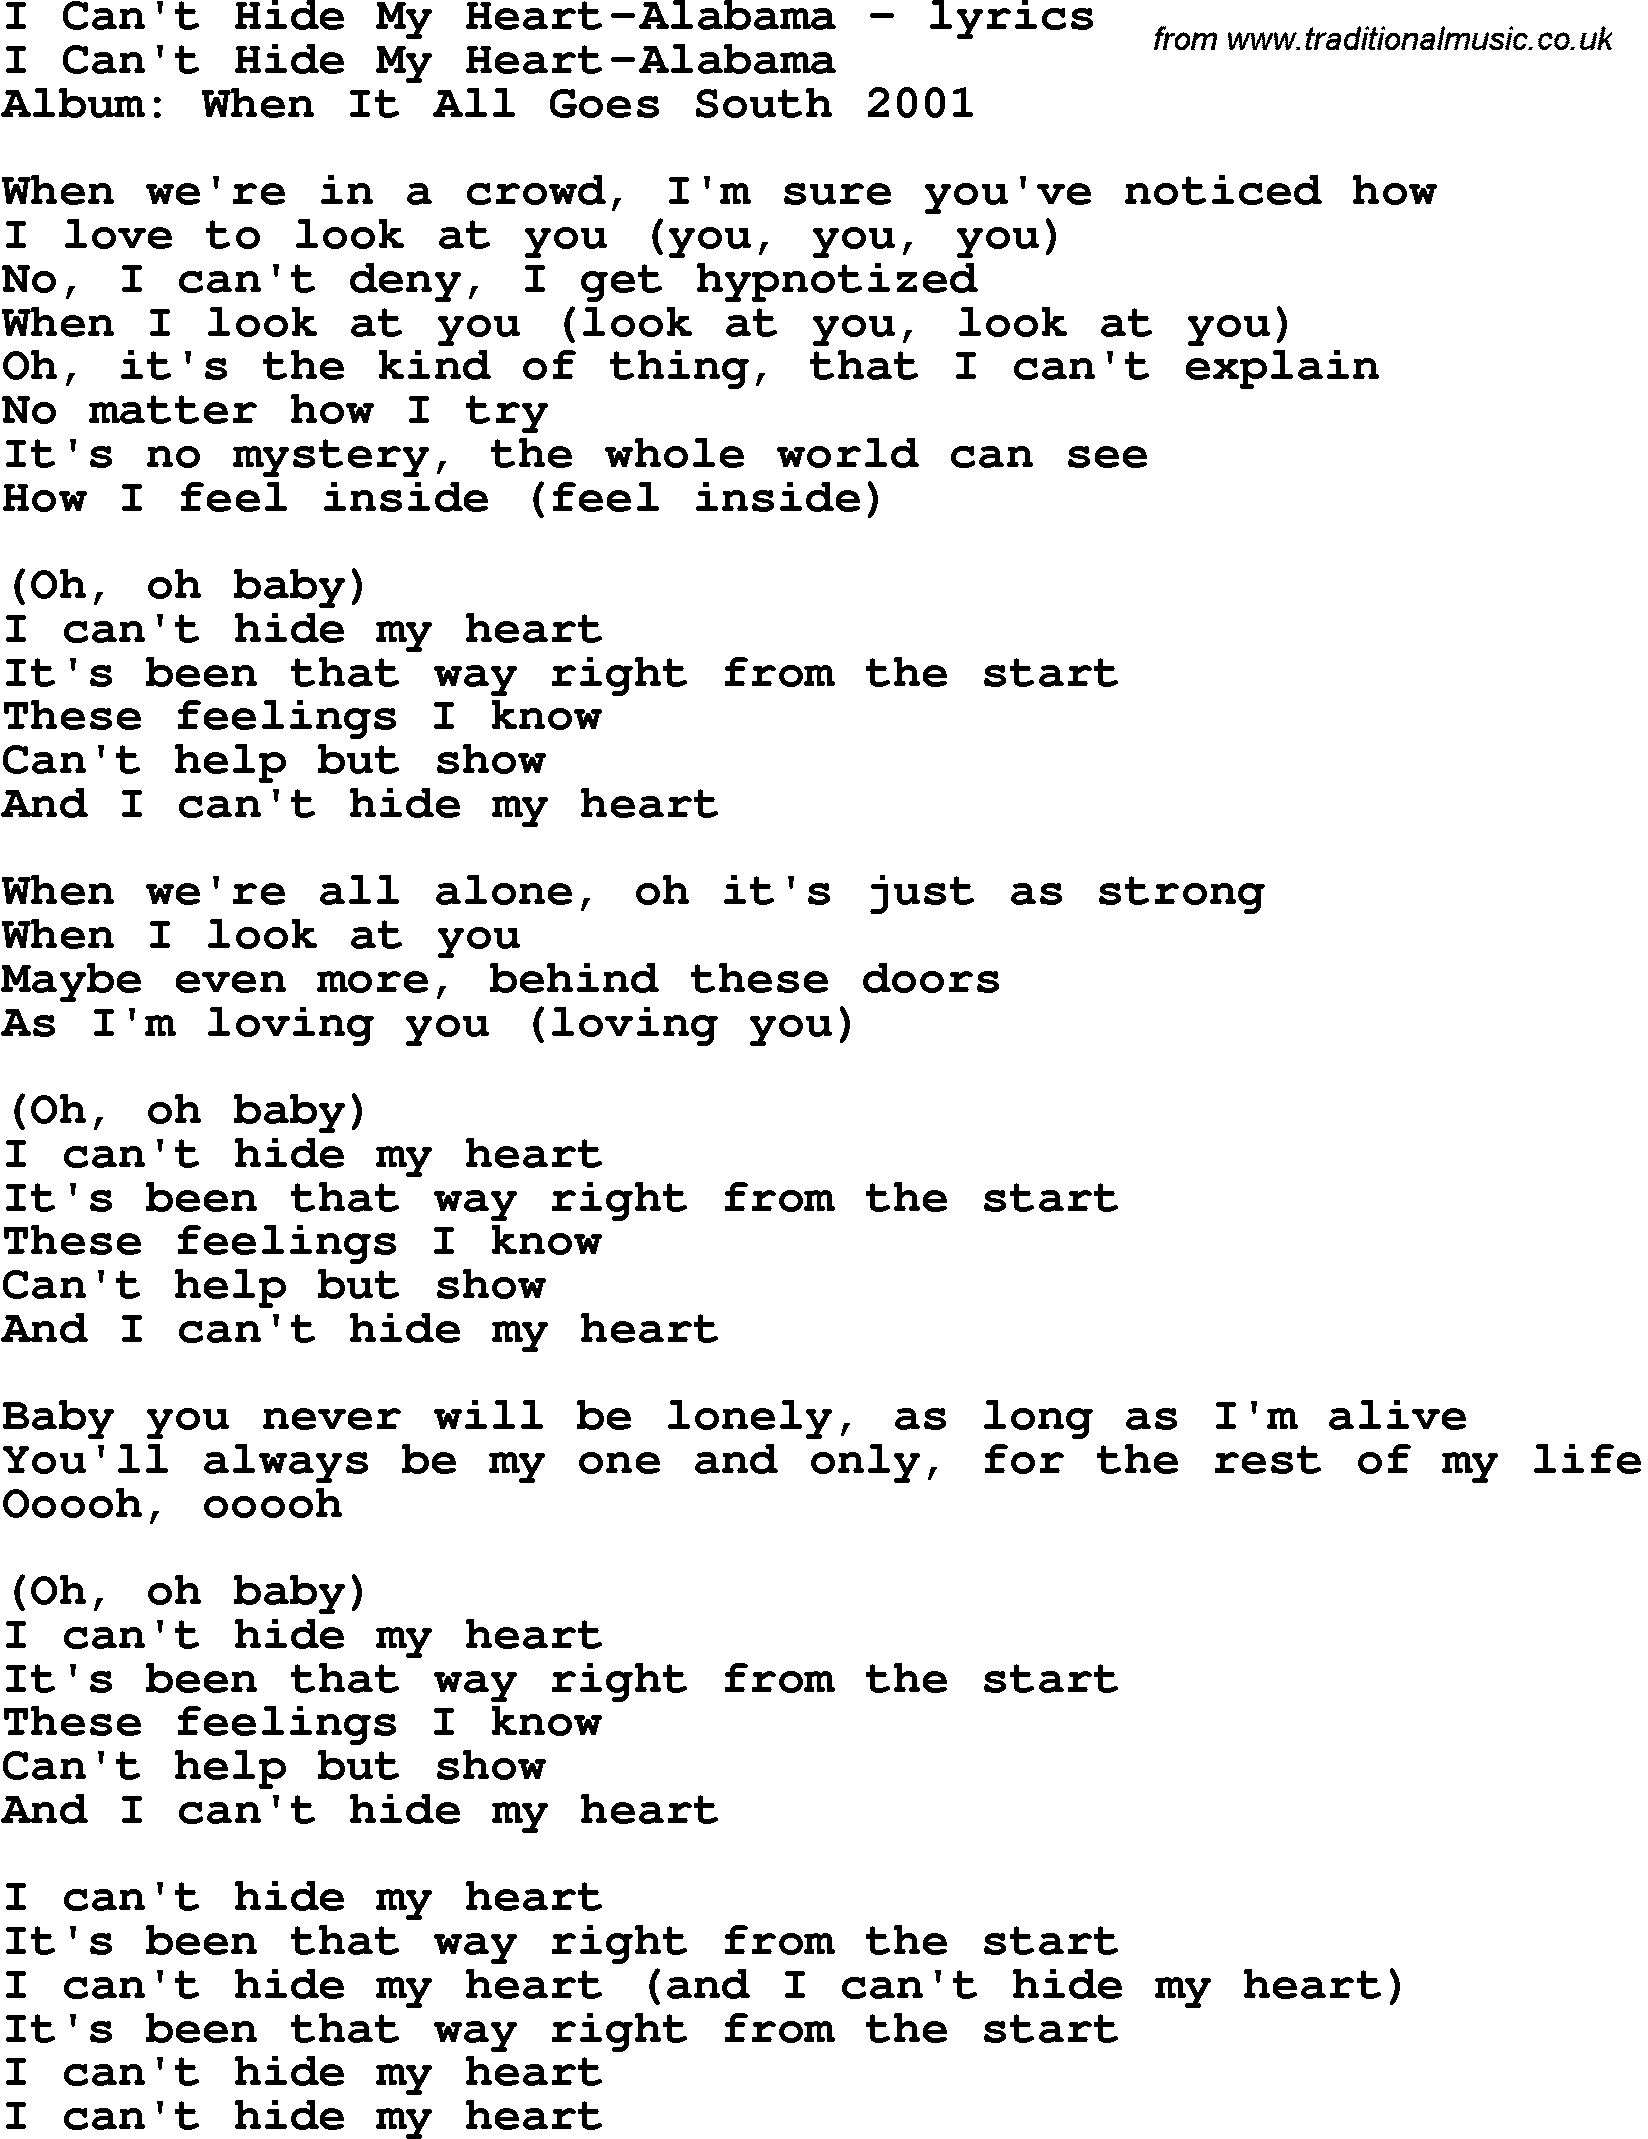 Love Song Lyrics for:I Can't Hide My Heart-Alabama.